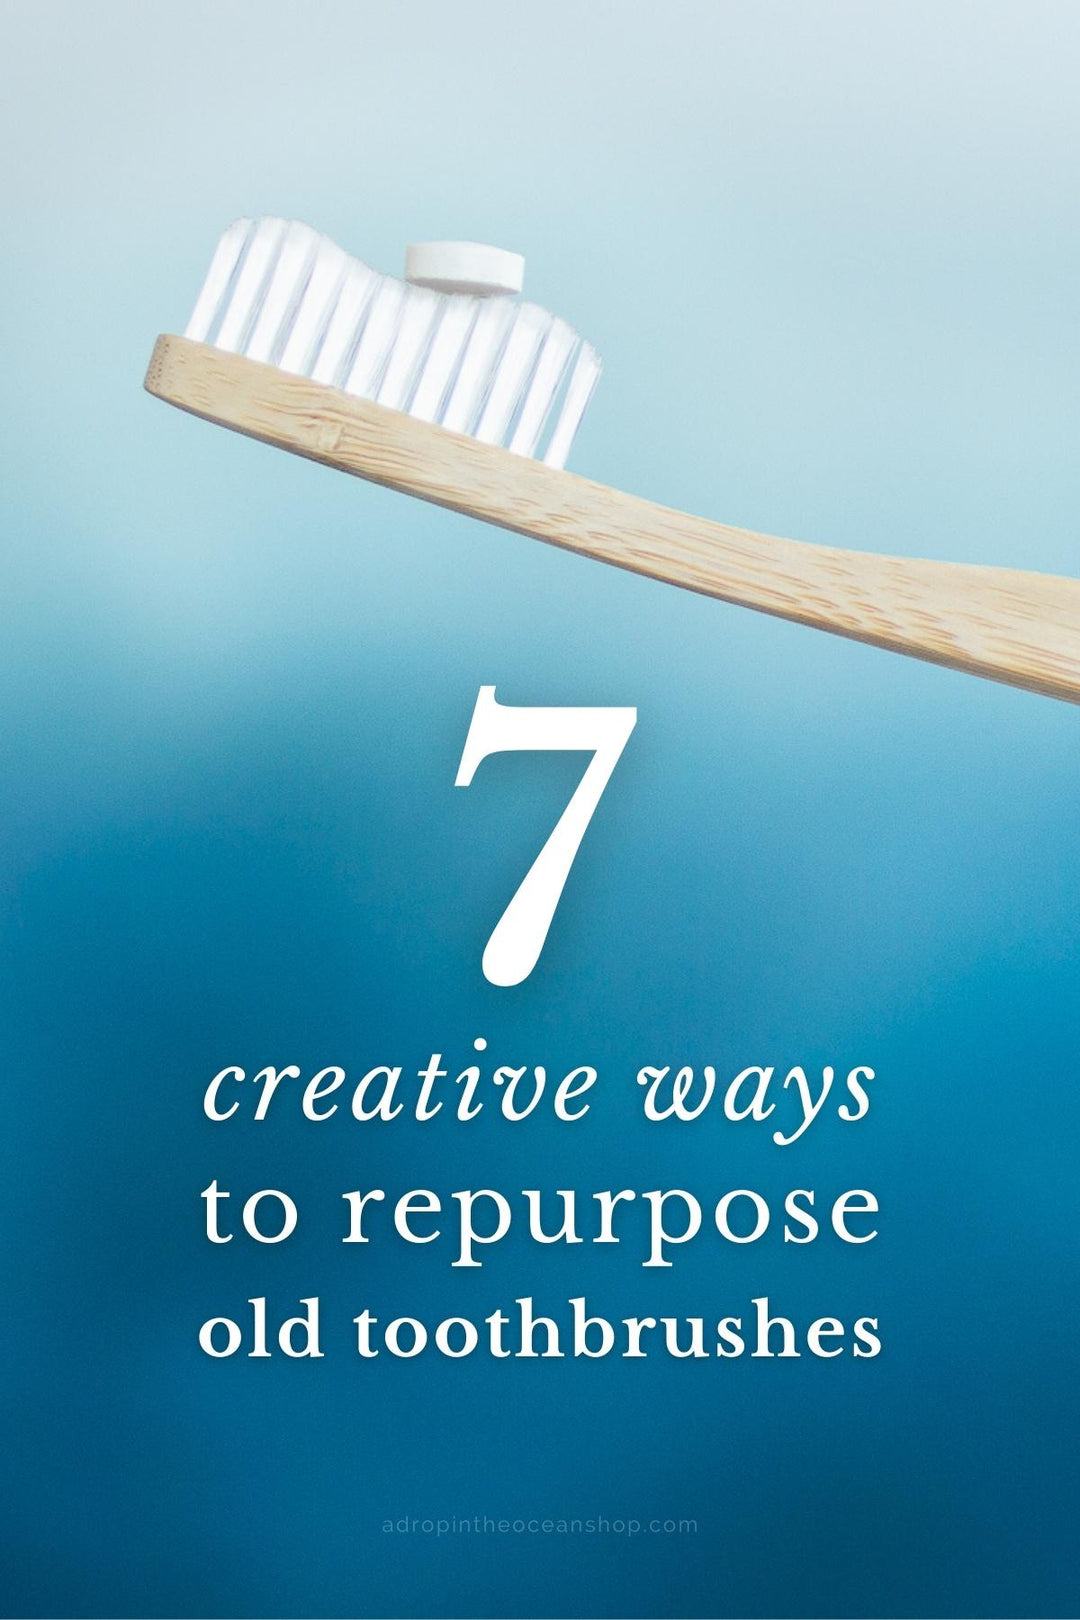 7 Creative Ways to Reuse Old Toothbrushes